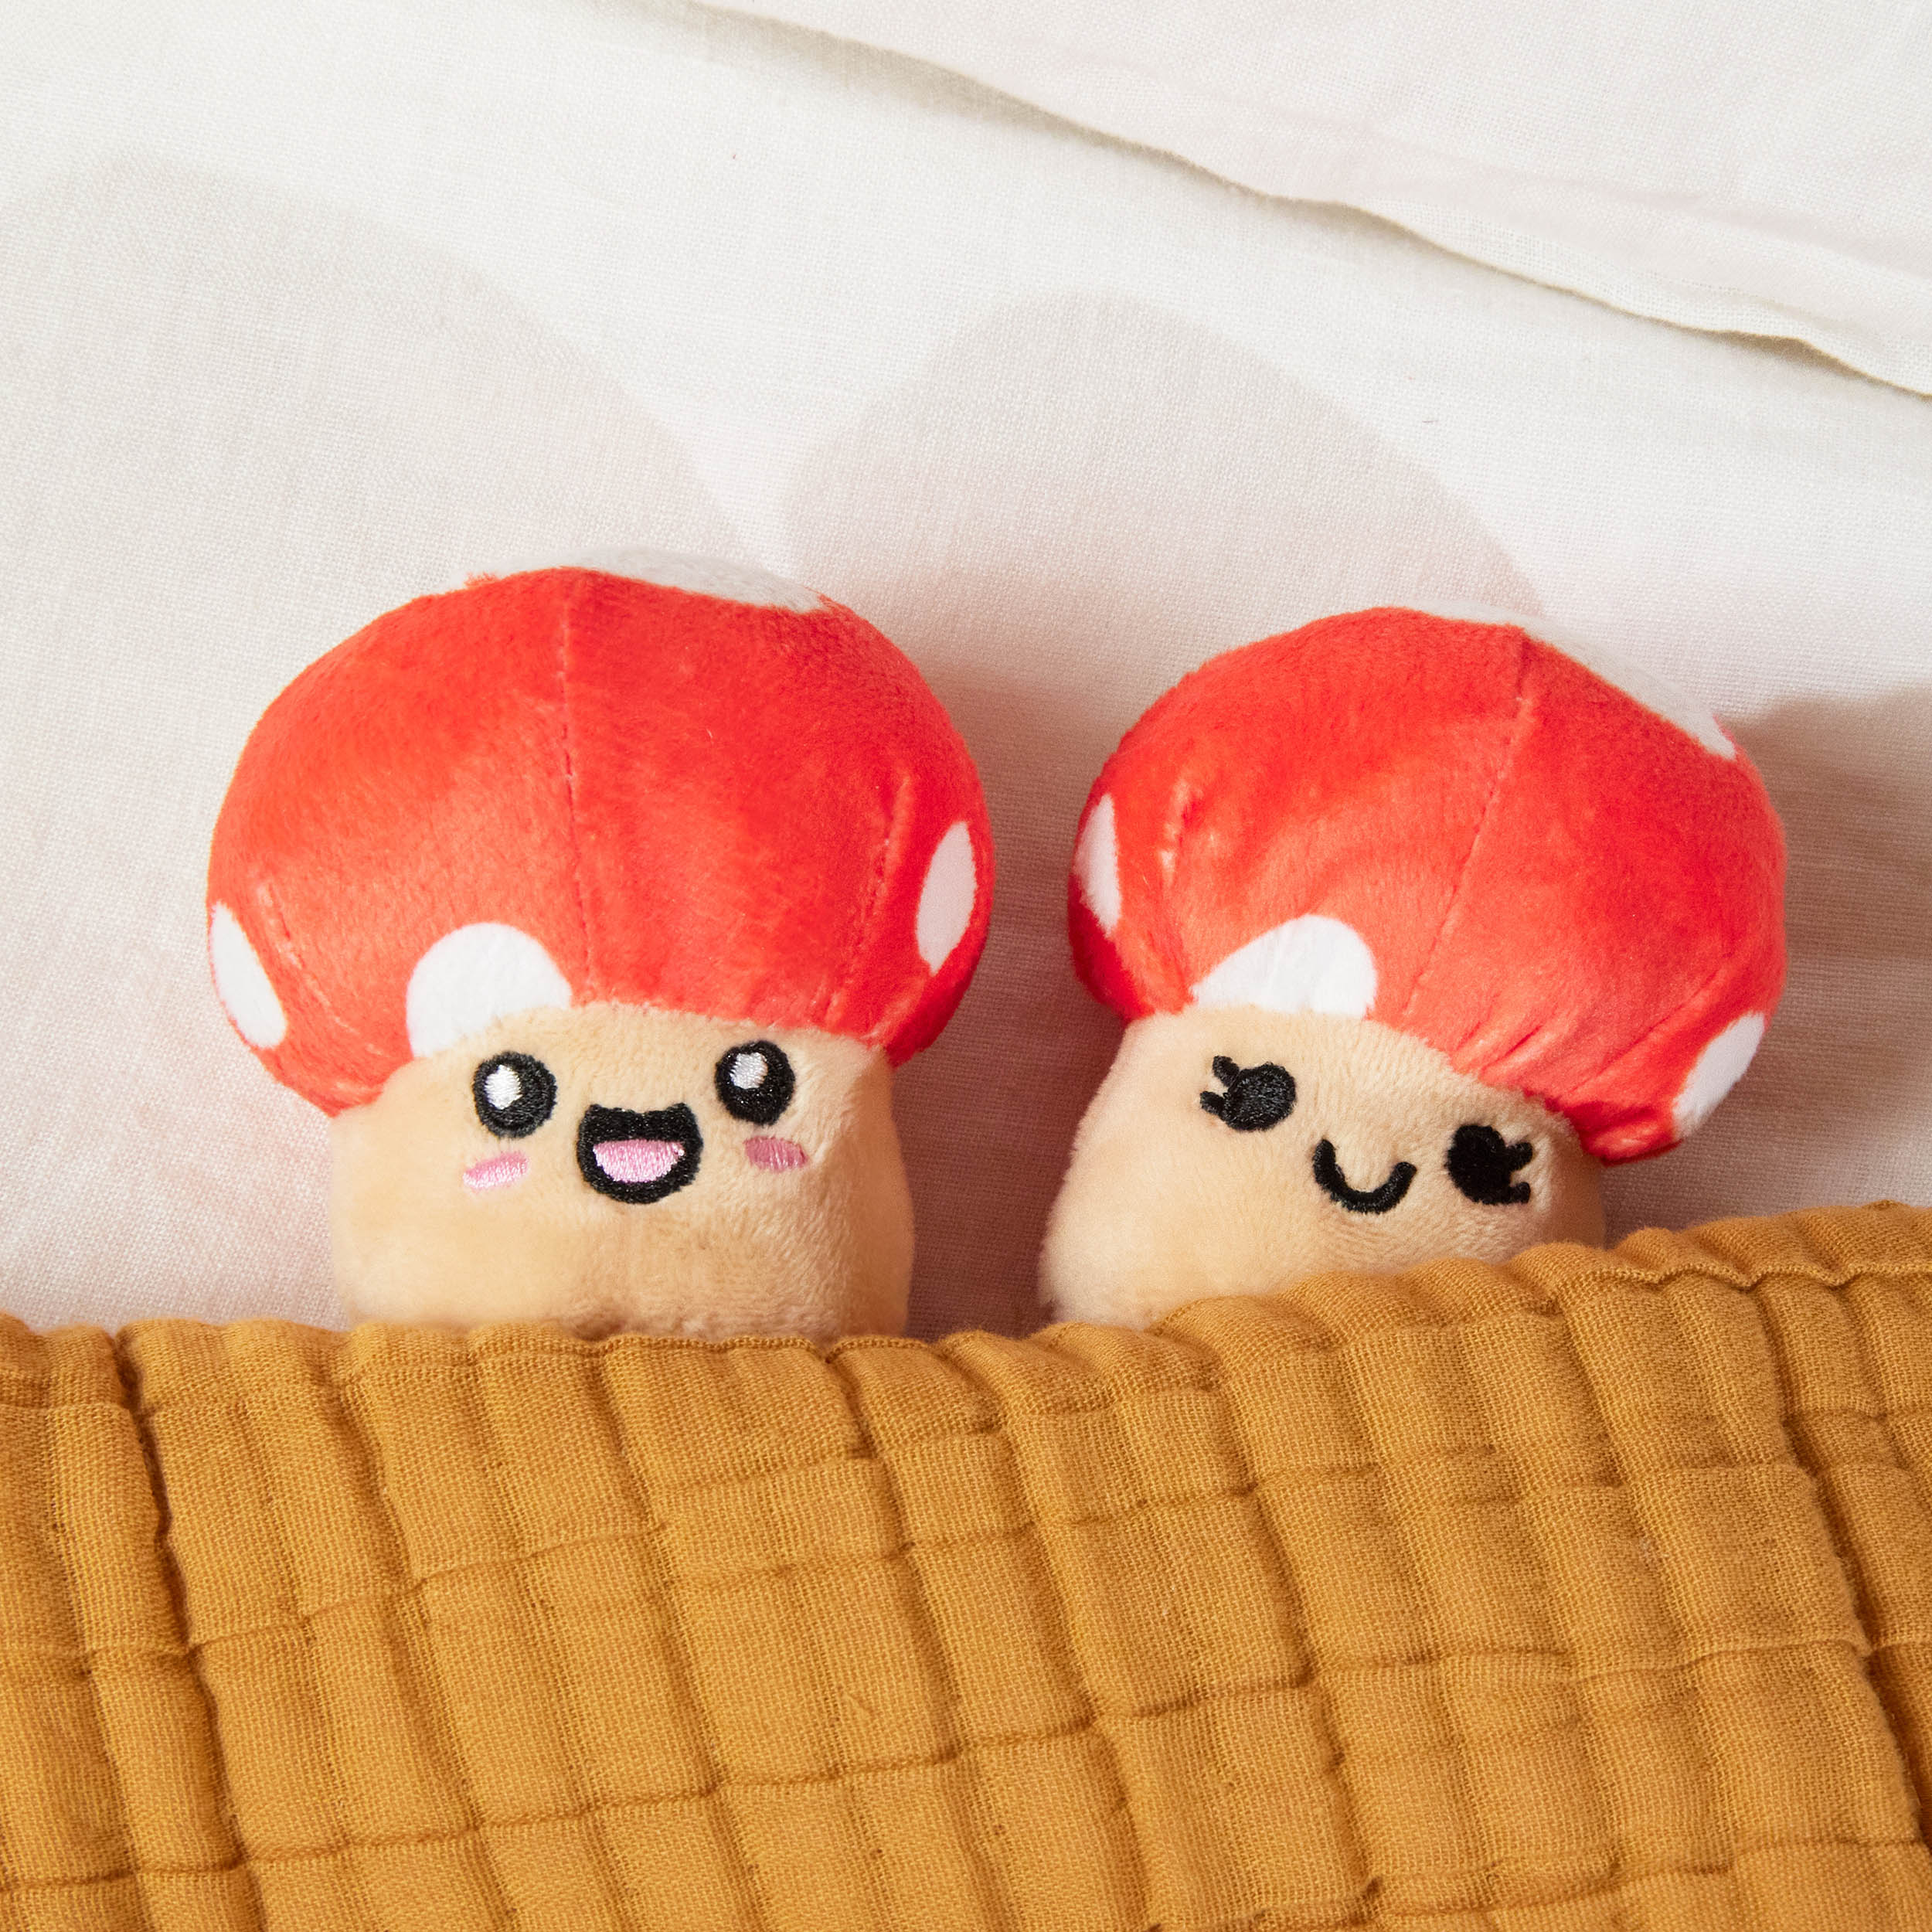 What Do You Meme? Emotional Support Mushrooms - Unique Gift for Valentine's  Day, Cute Mushroom Plushies Decor